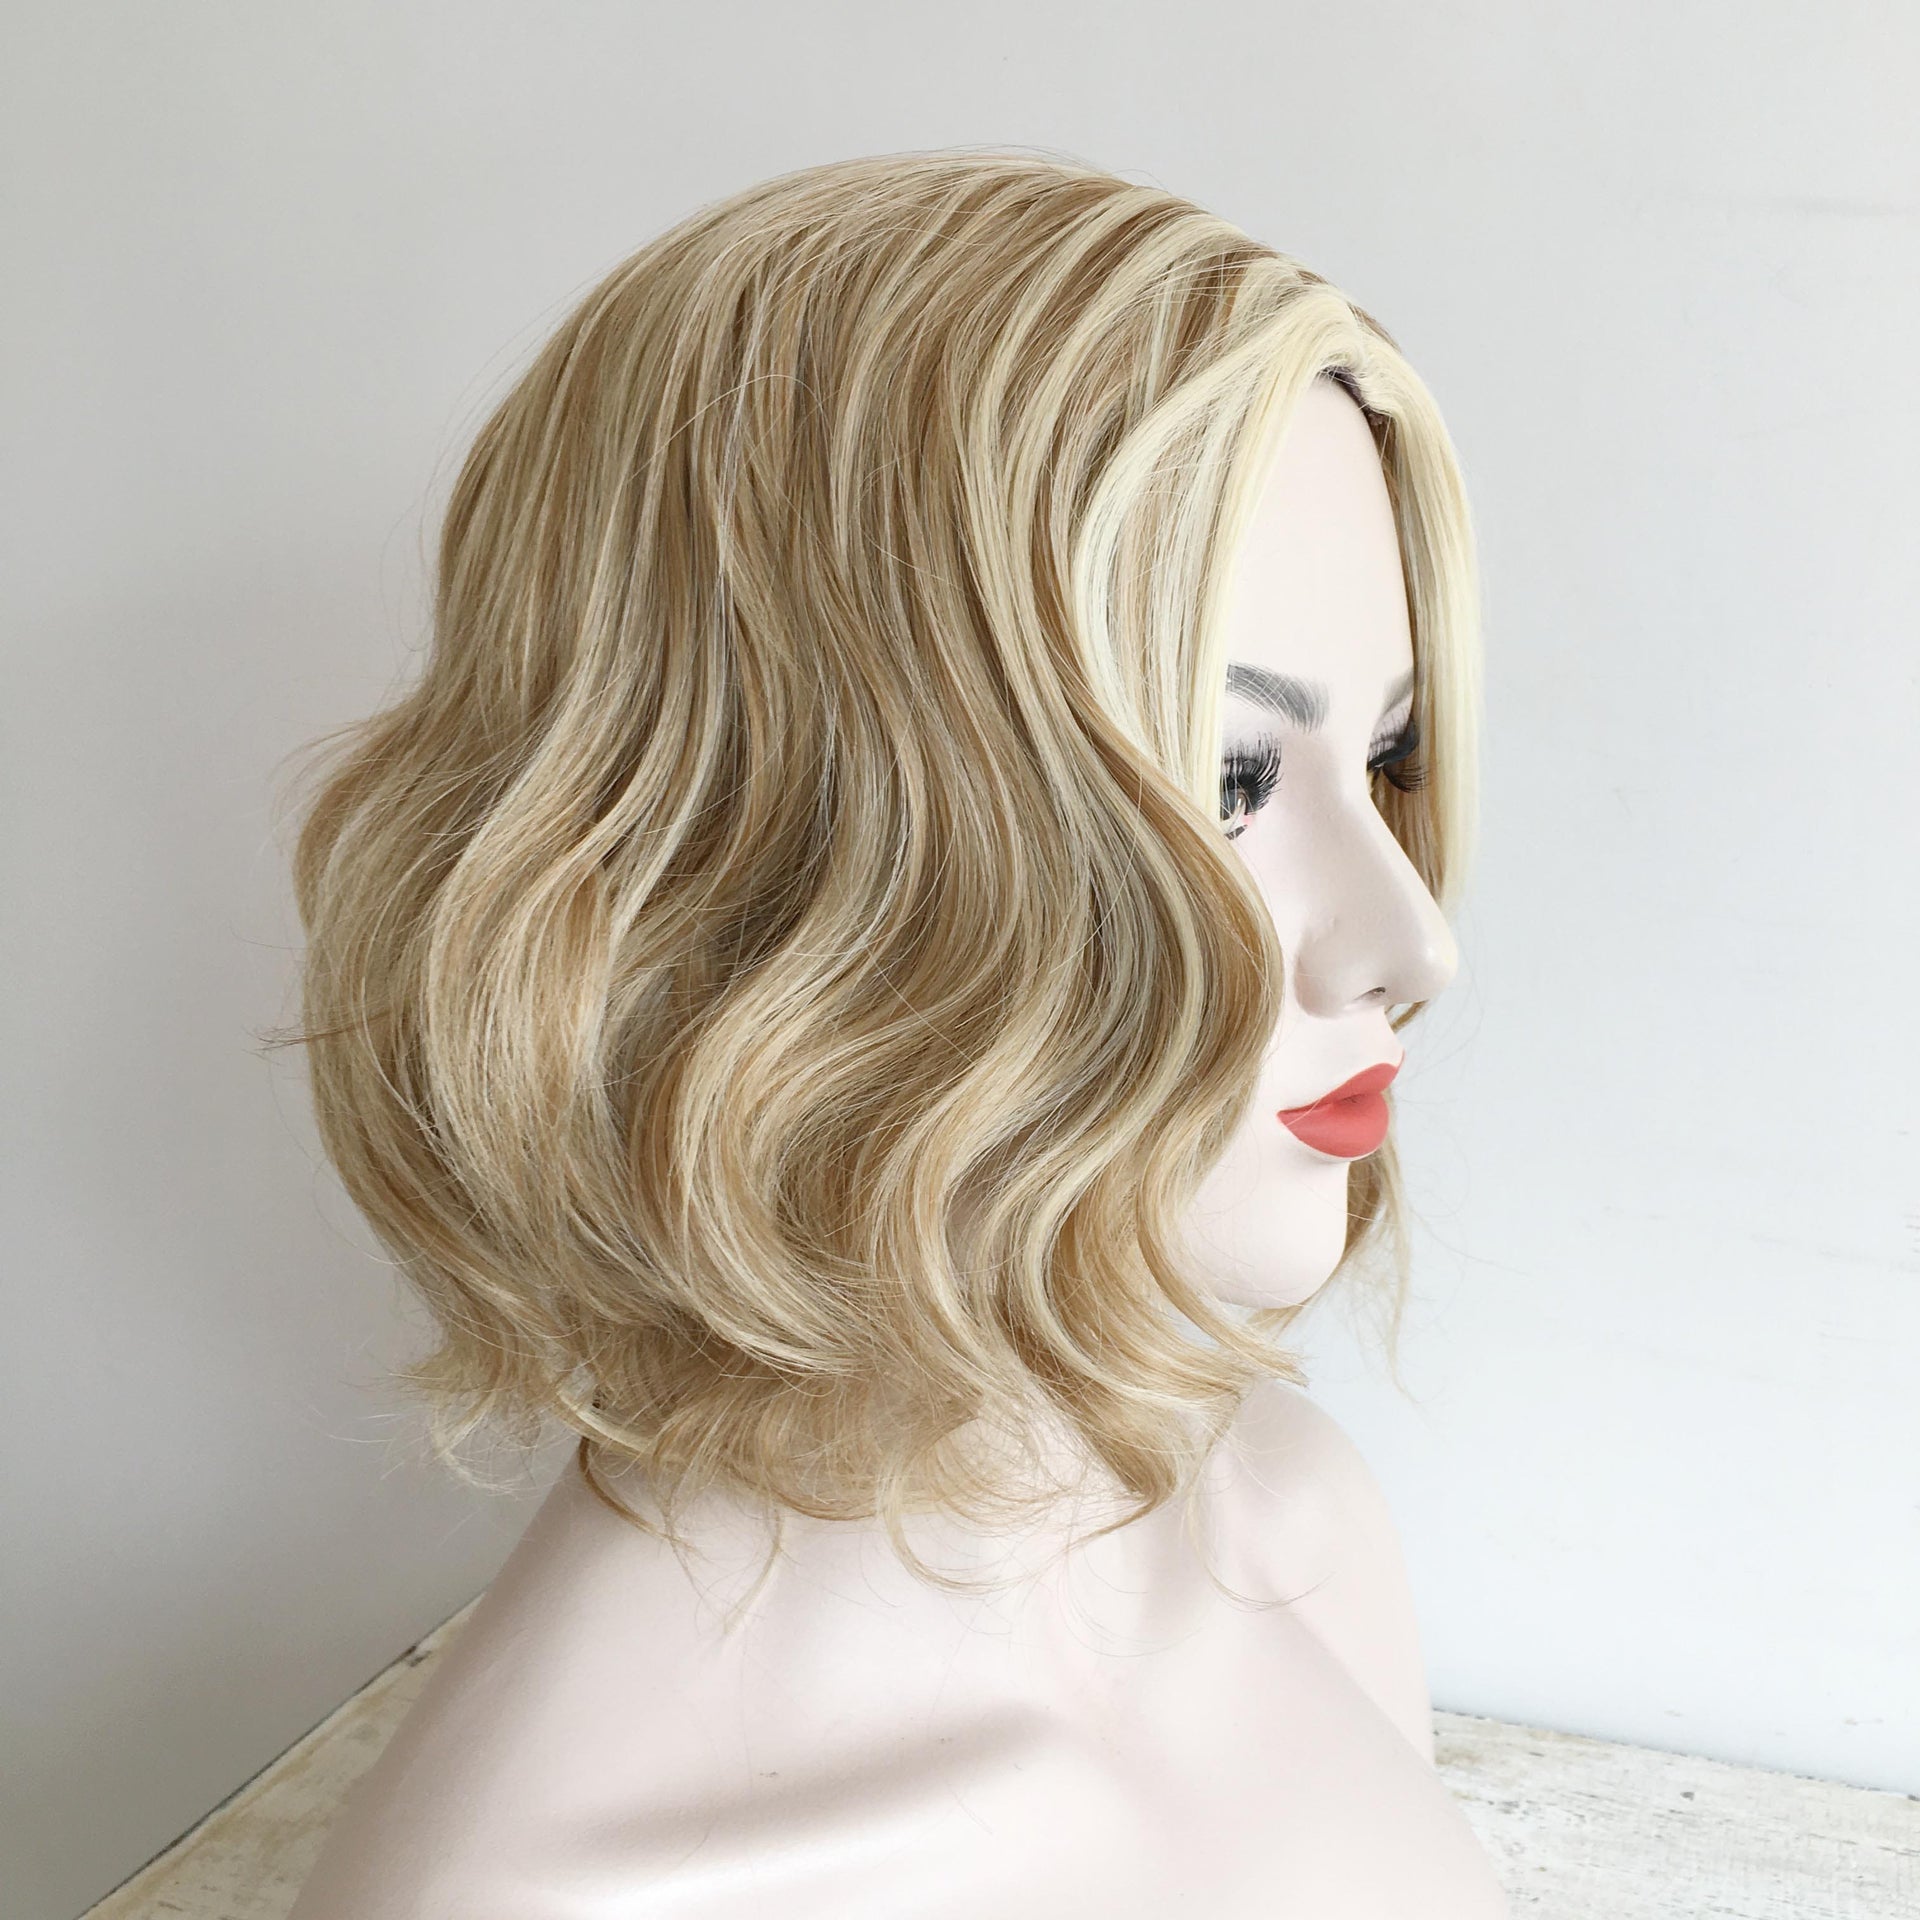 nevermindyrhead Women Light Toffee Blonde Ombre Short Curly Bob Side Part Wig